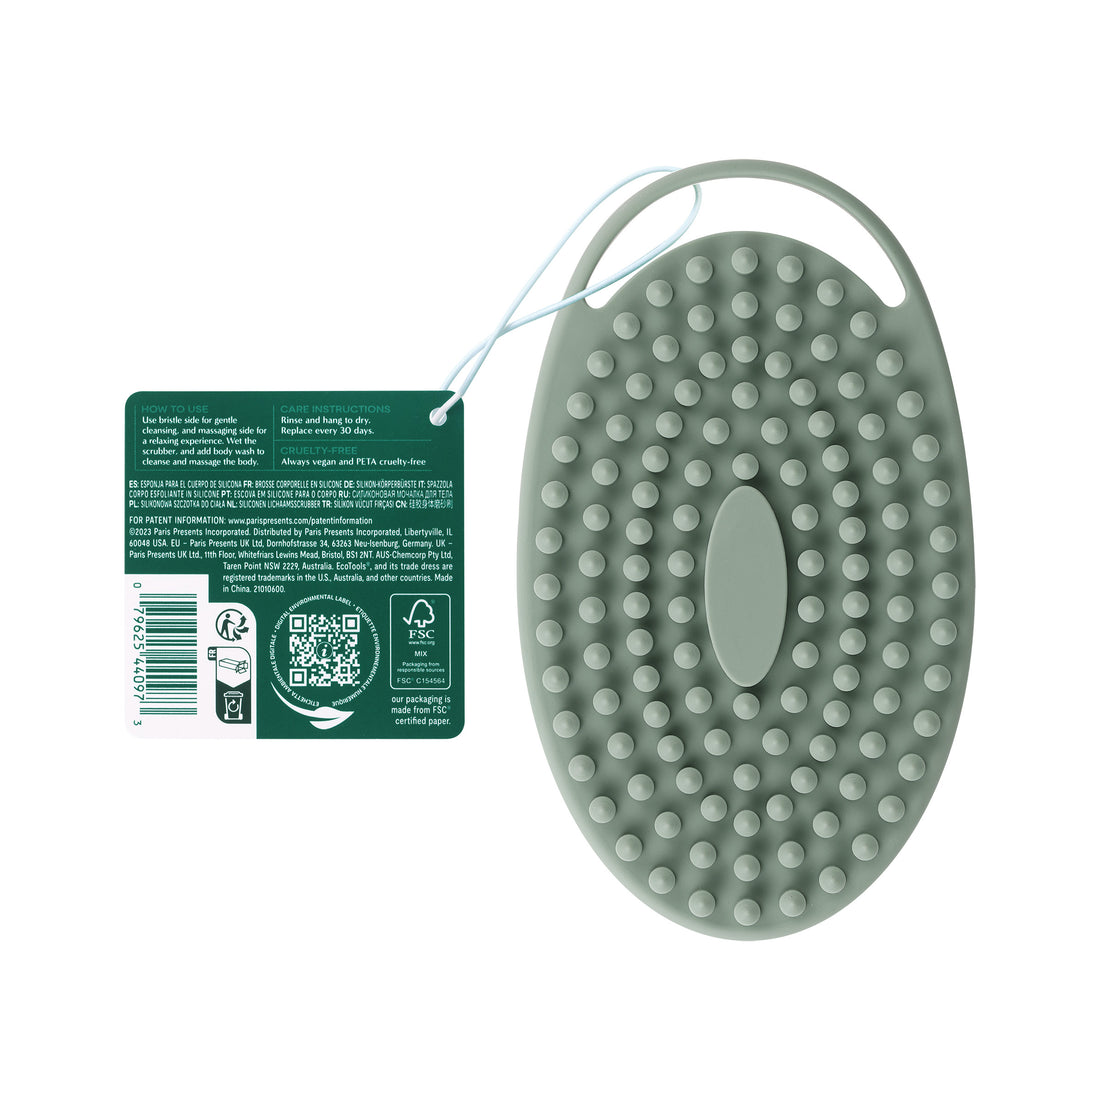 EcoTools Silicone Body Scrubber, For Gentle Cleansing